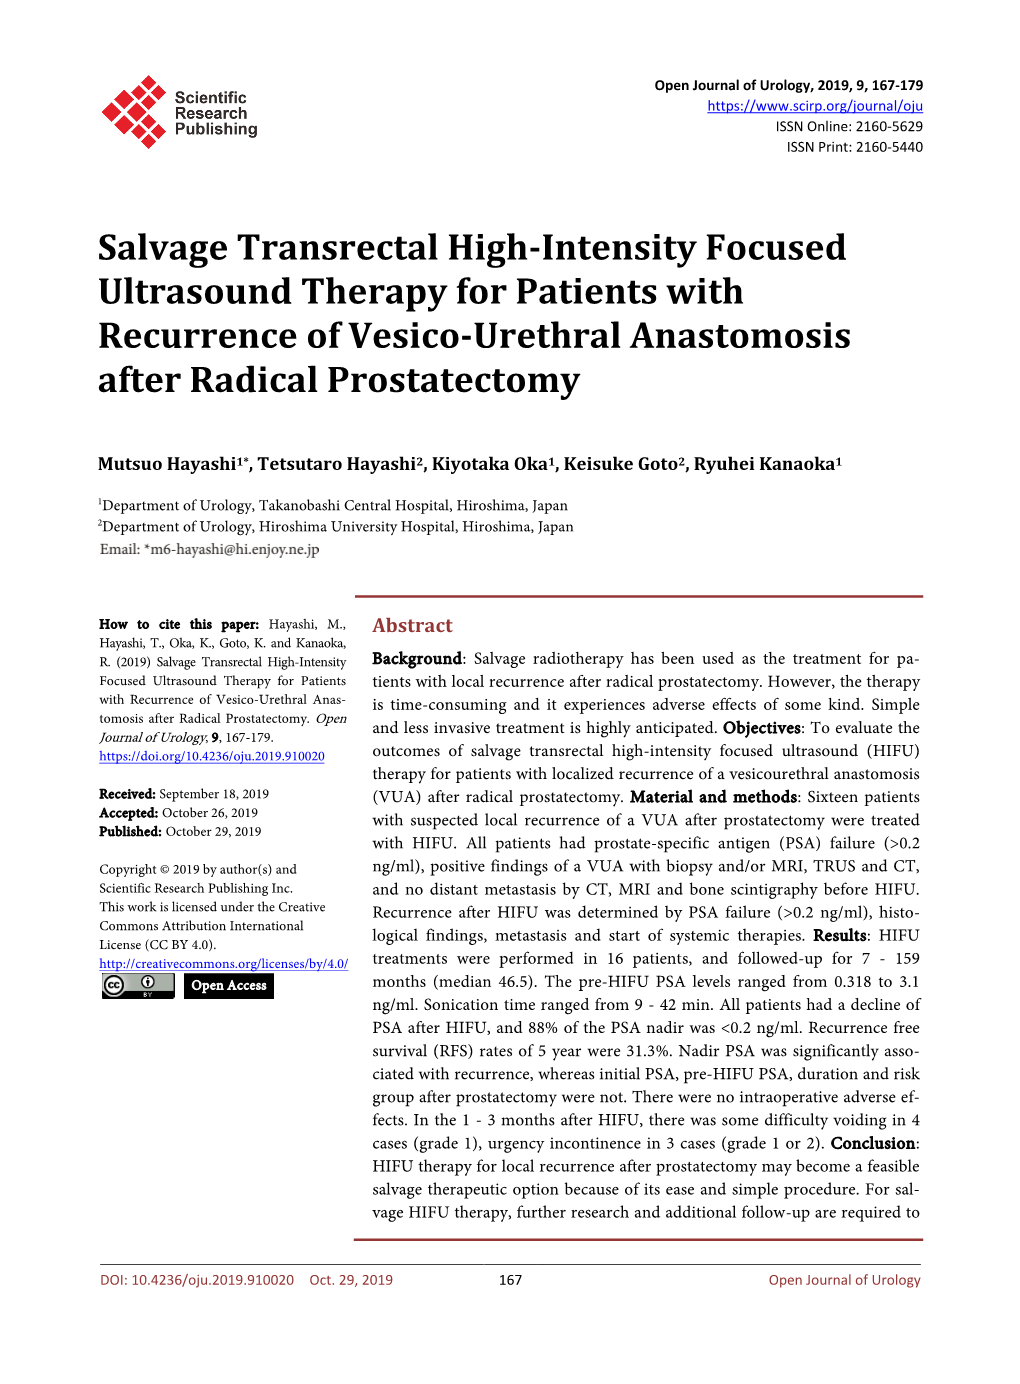 Salvage Transrectal High-Intensity Focused Ultrasound Therapy for Patients with Recurrence of Vesico-Urethral Anastomosis After Radical Prostatectomy